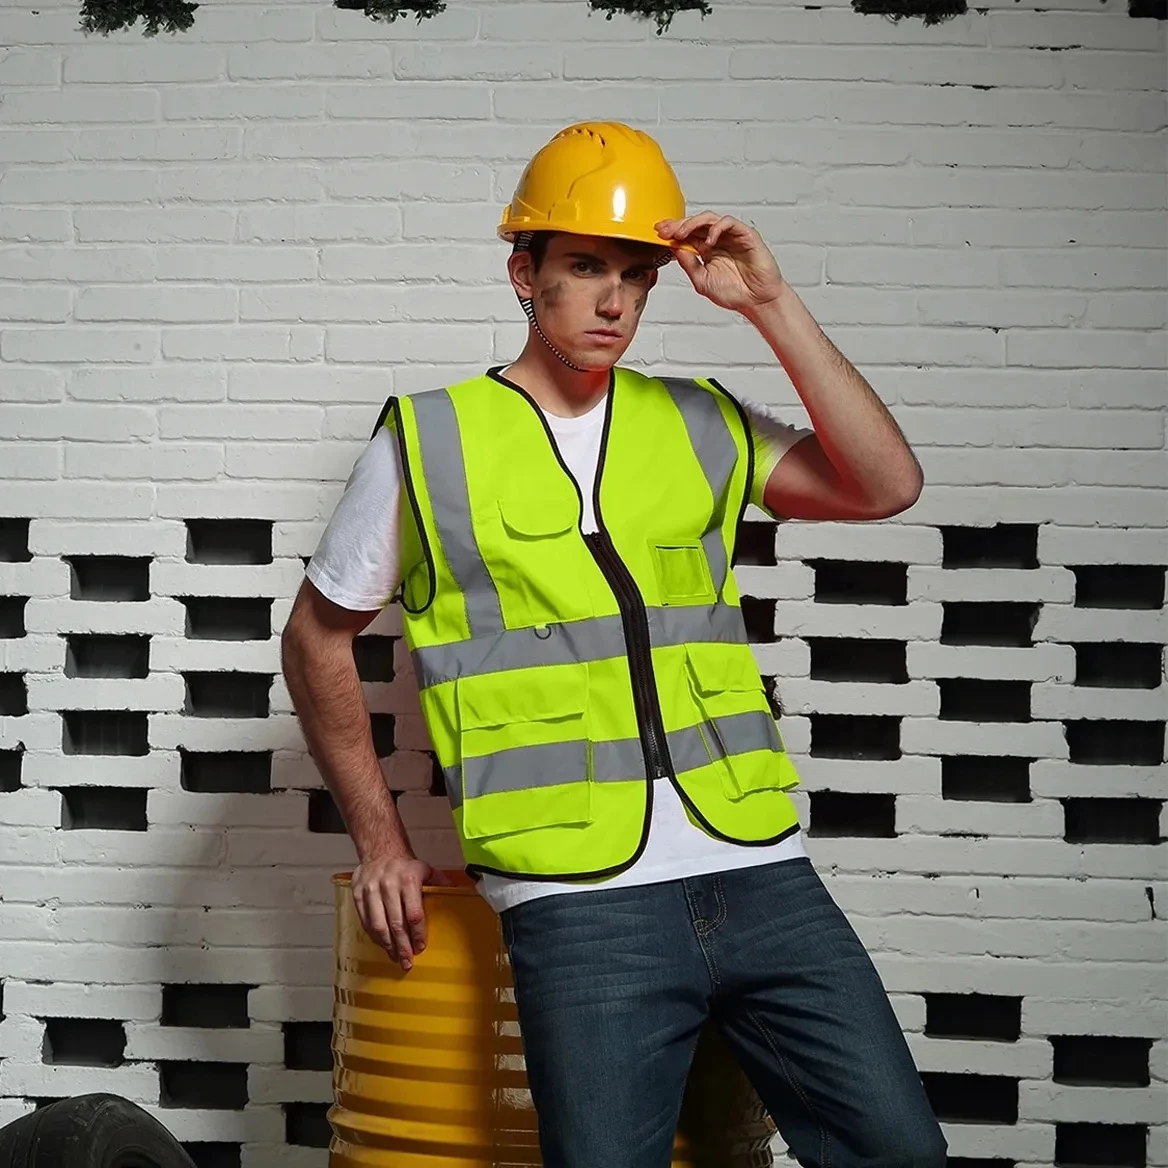 https://ae01.alicdn.com/kf/Sea0a8d3f584c488fbde8e1c95fd6a3601/High-Visibility-Reflective-Safety-Reflective-Vest-Personalized-Customized-Night-Cycling-Work-Clothes-For-Construction-Workers.jpg